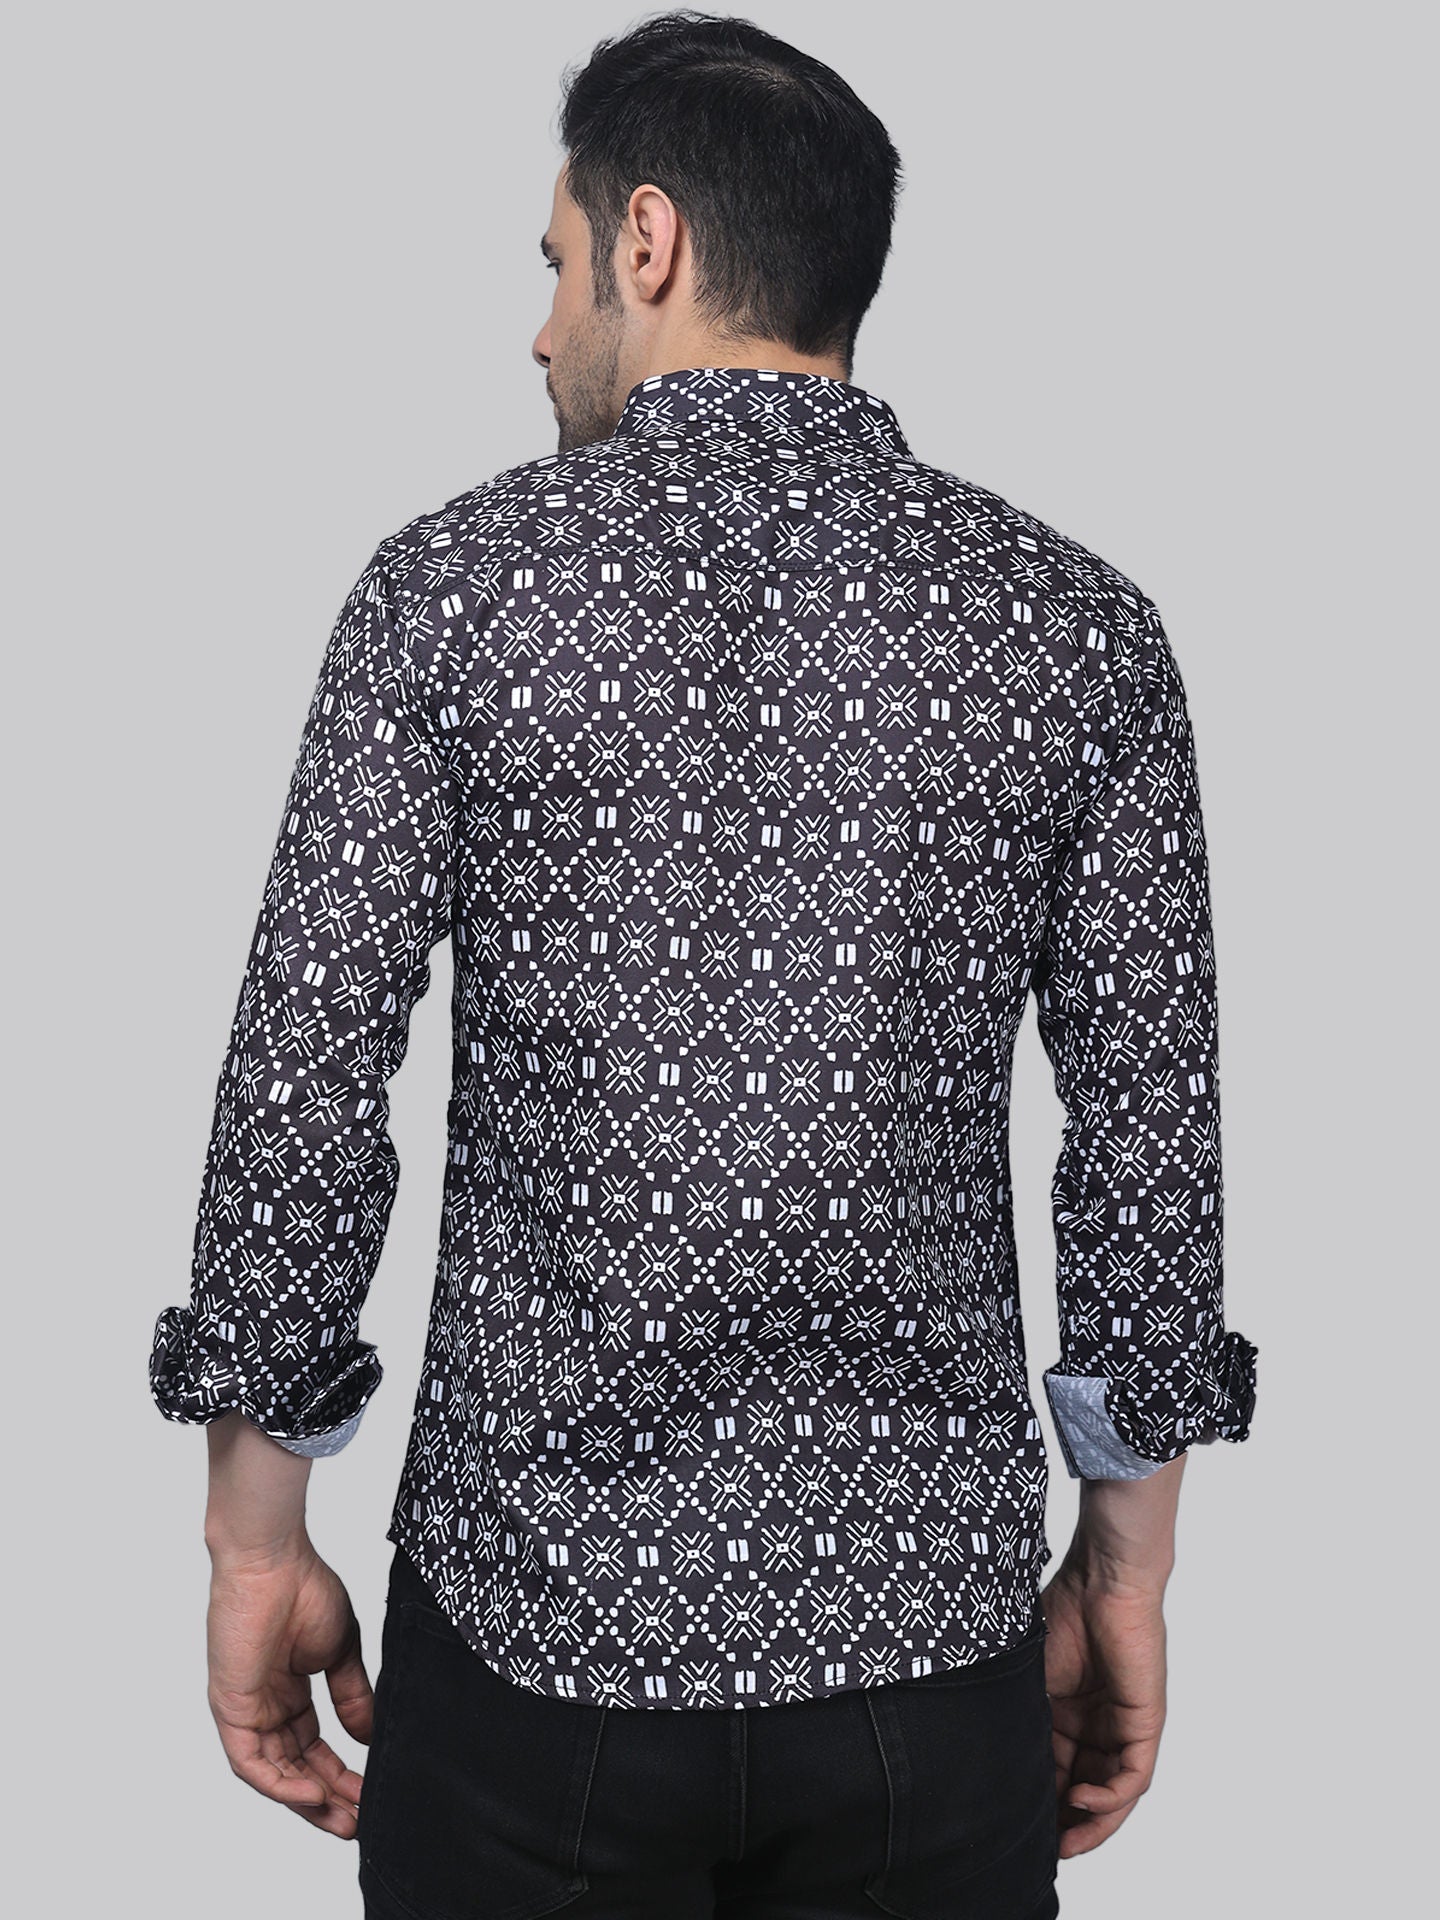 Floral Frenzy Men's Printed Full Sleeve Casual Linen Shirt - TryBuy® USA🇺🇸